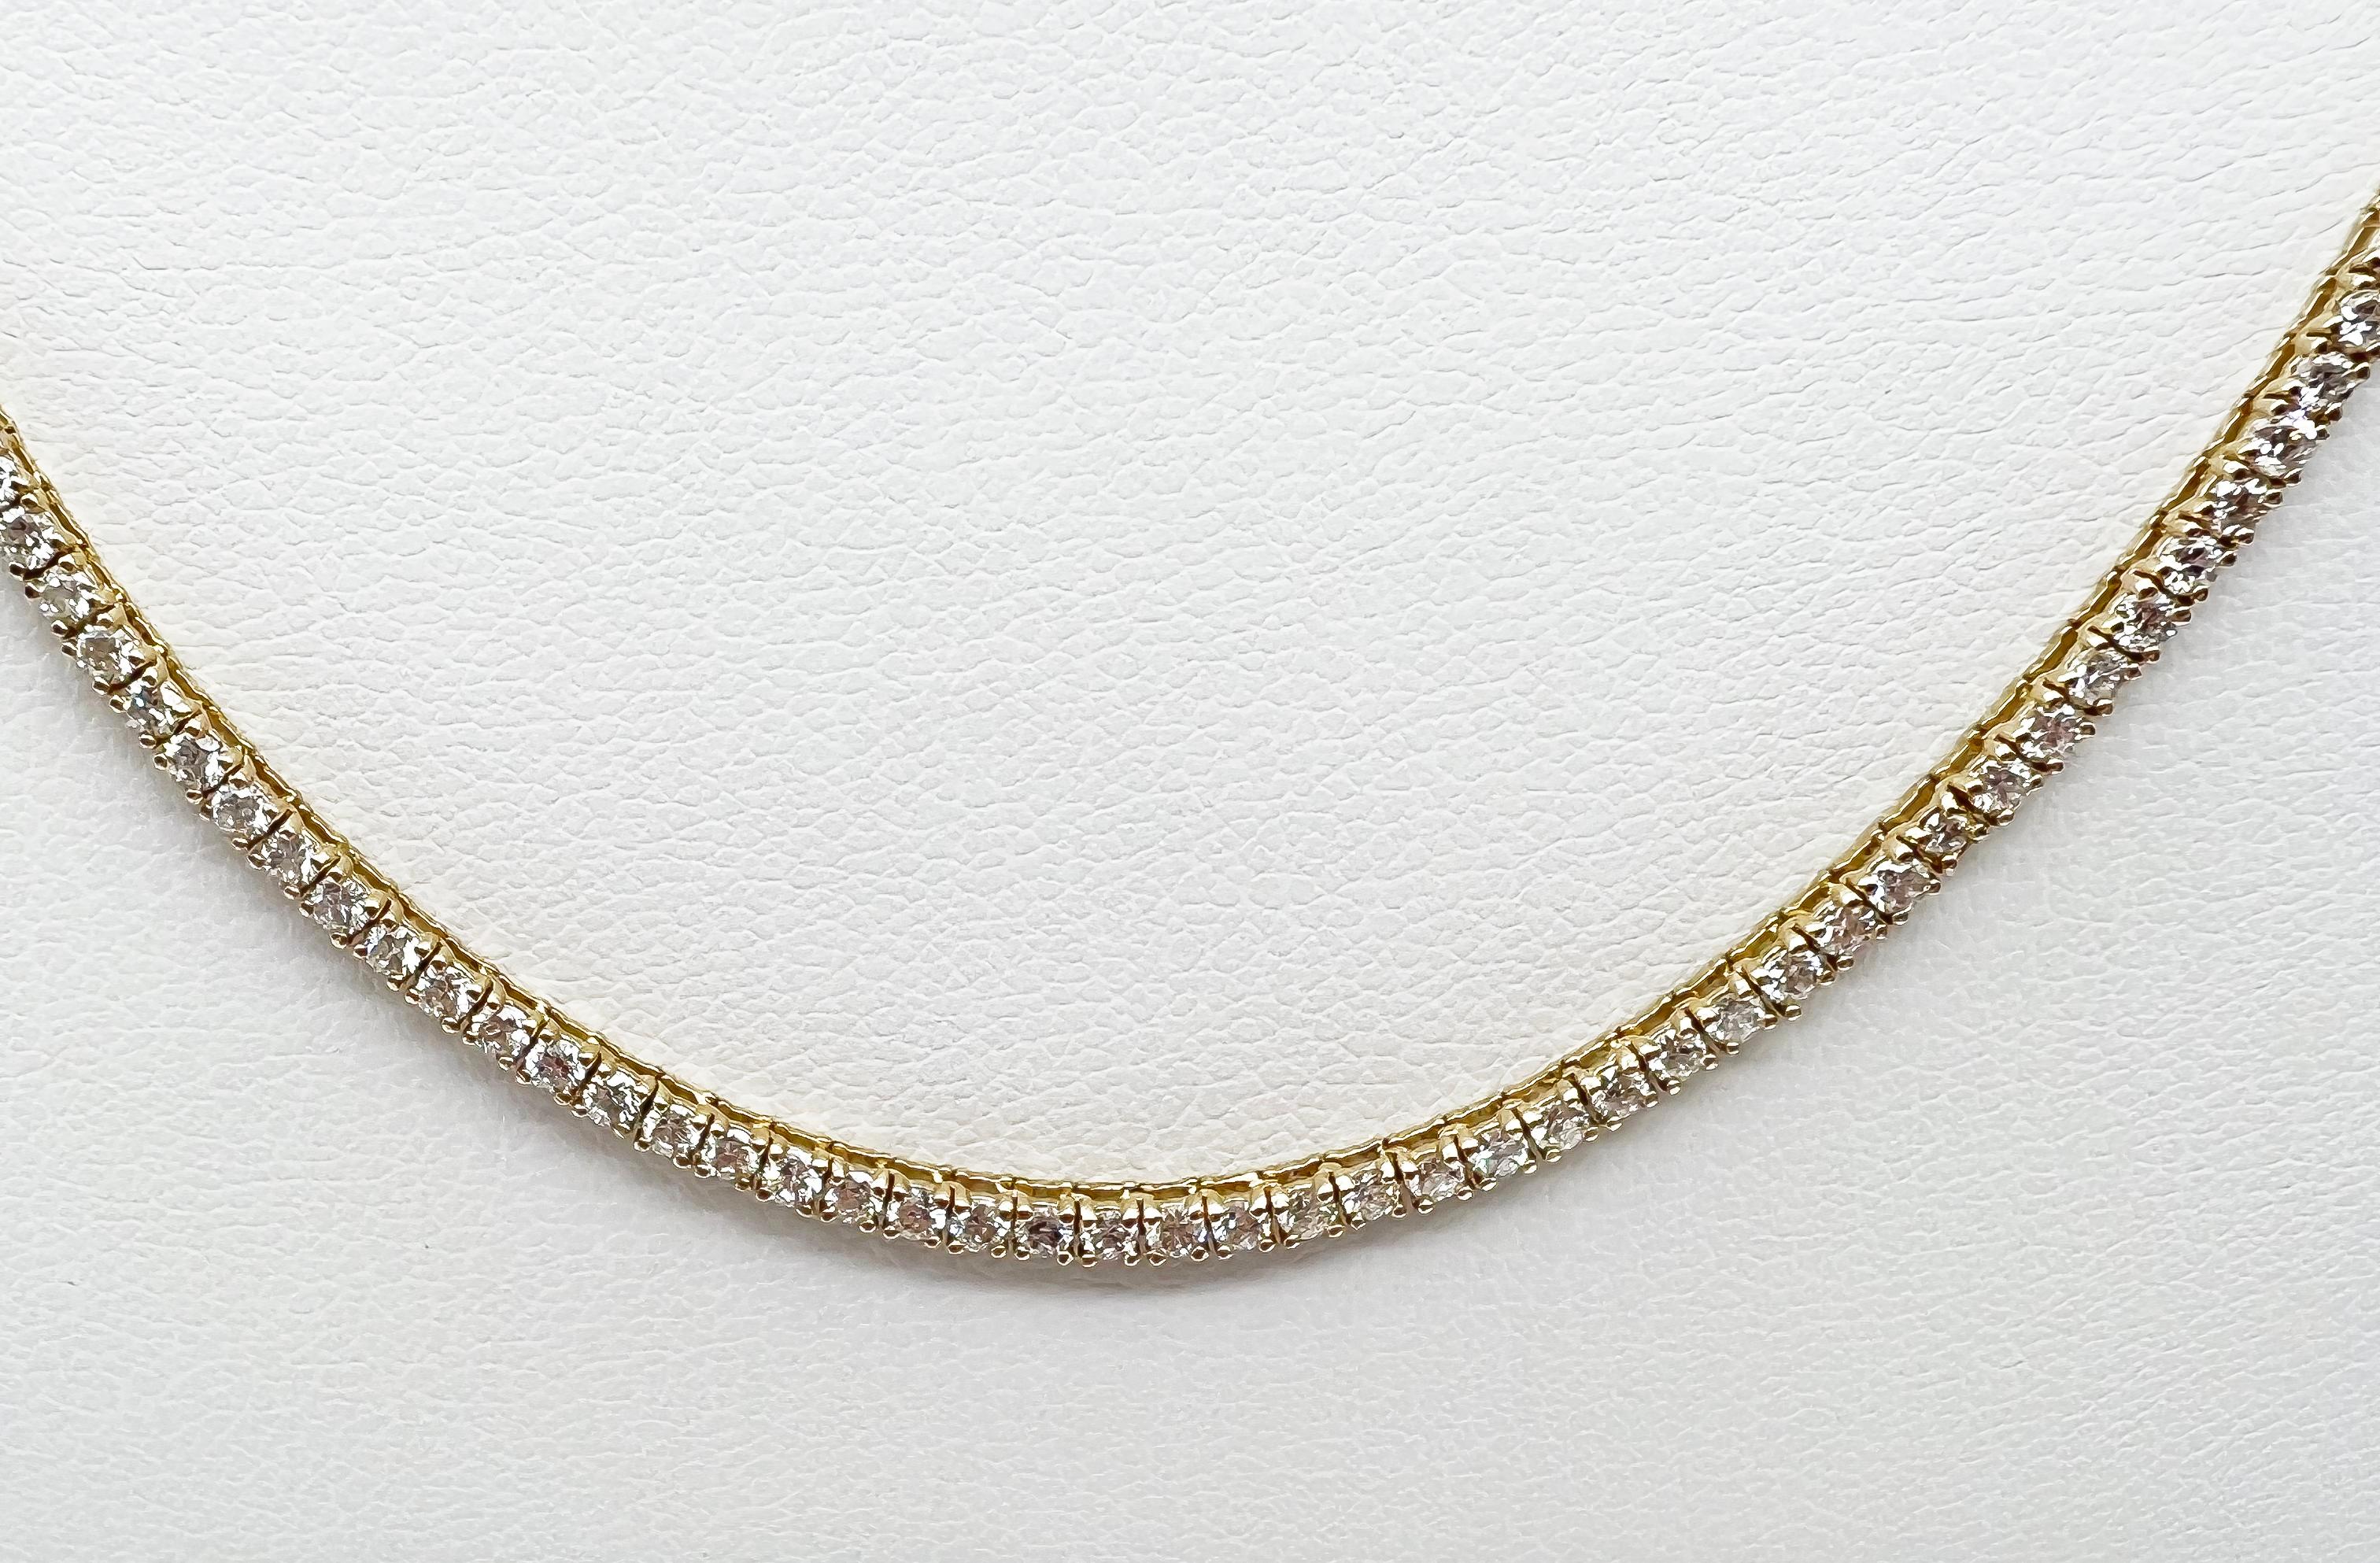 4.17 Carat Diamond Tennis Necklace with Round Diamonds in Yellow Gold Chain

Tennis necklaces are the epitome of versatility and elegance. Here we have a classic, timeless piece that you could wear it everyday or only on occasions, alone or paired